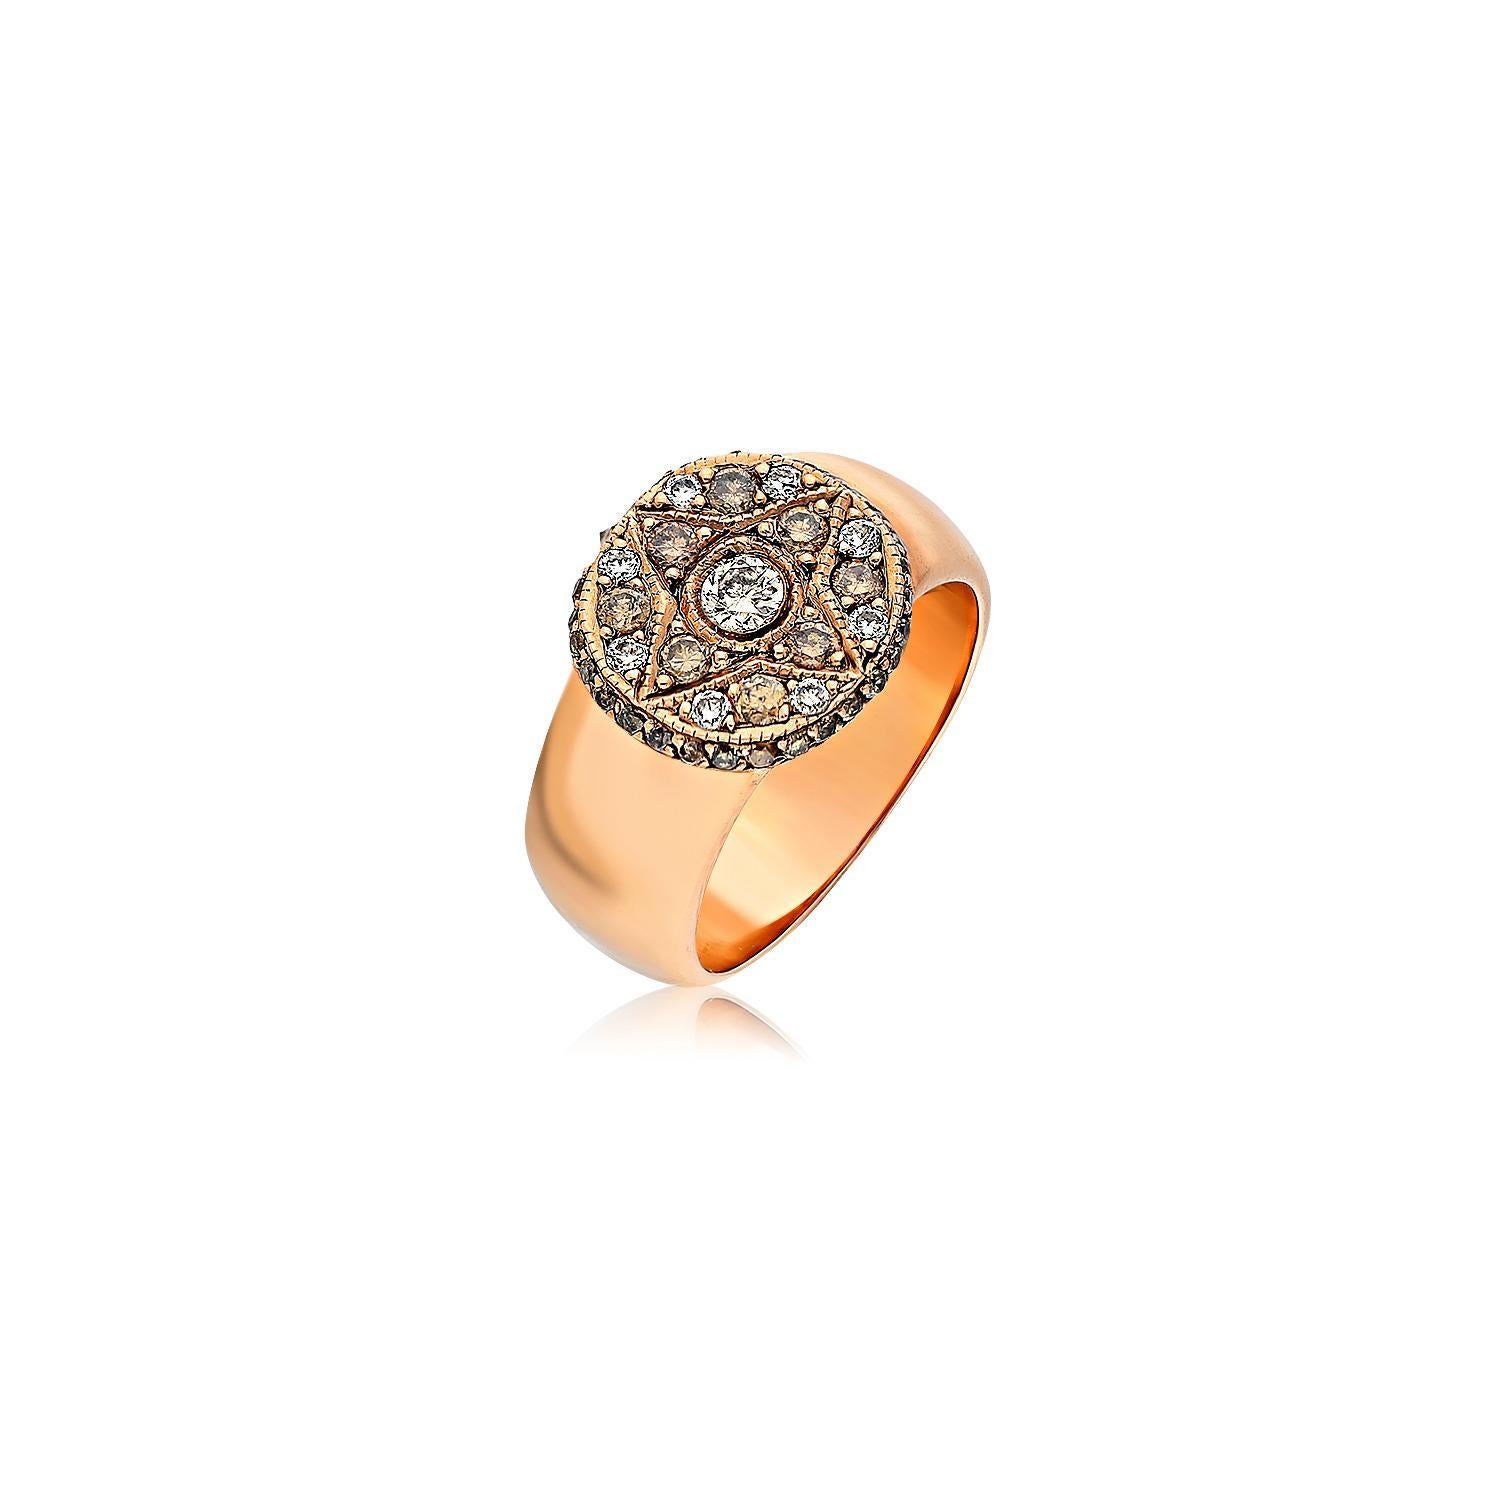 For Sale:  8k Gold Round Ring with Pave Brilliant Cut Diamonds 2